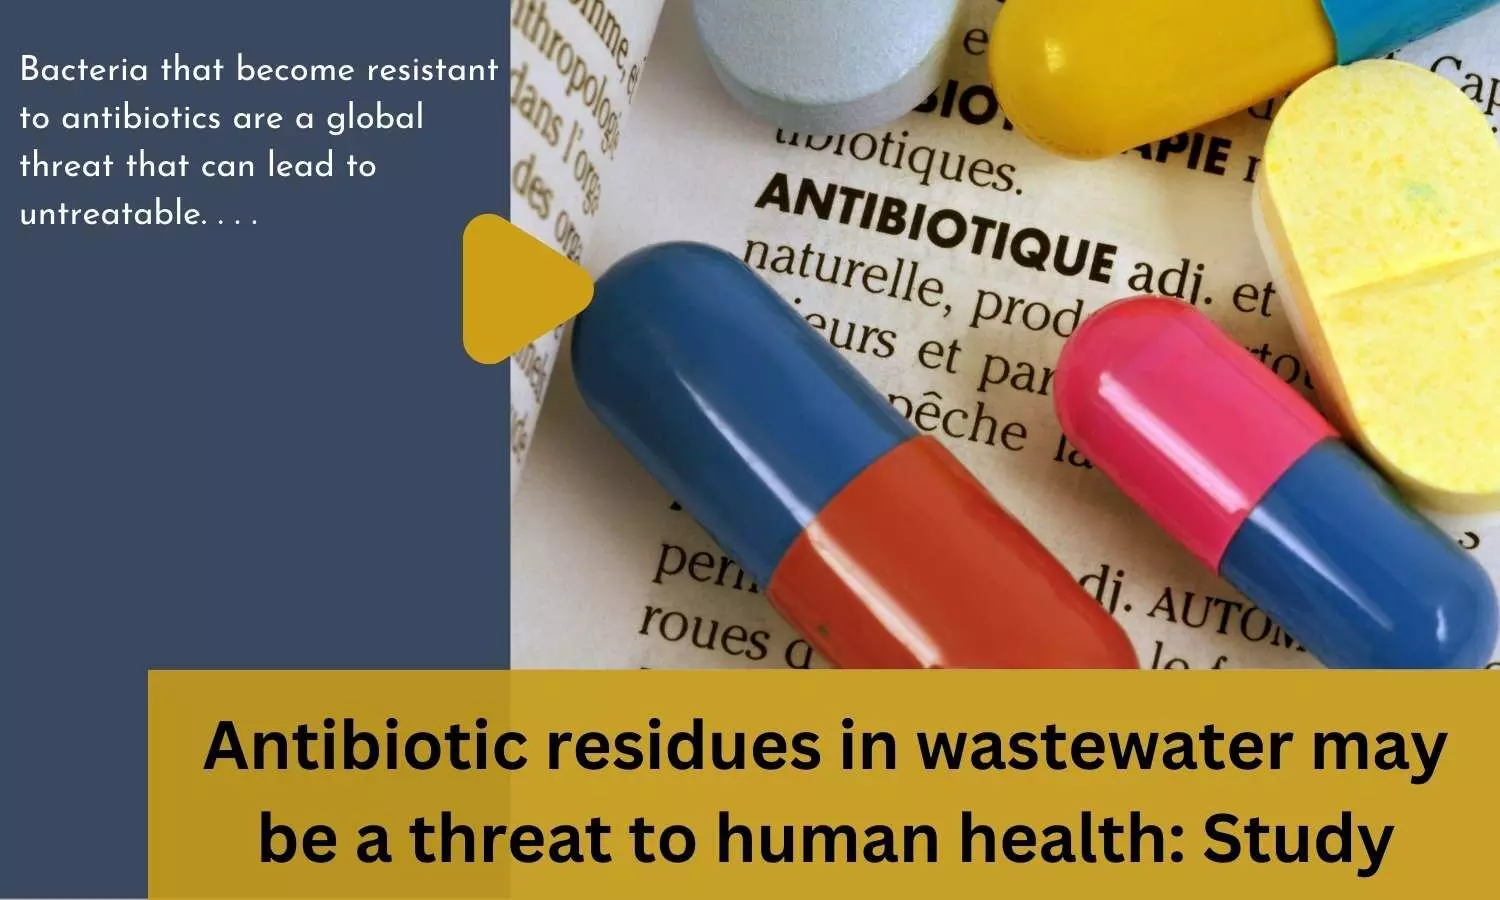 Antibiotic residues in wastewater may be a threat to human health: Study